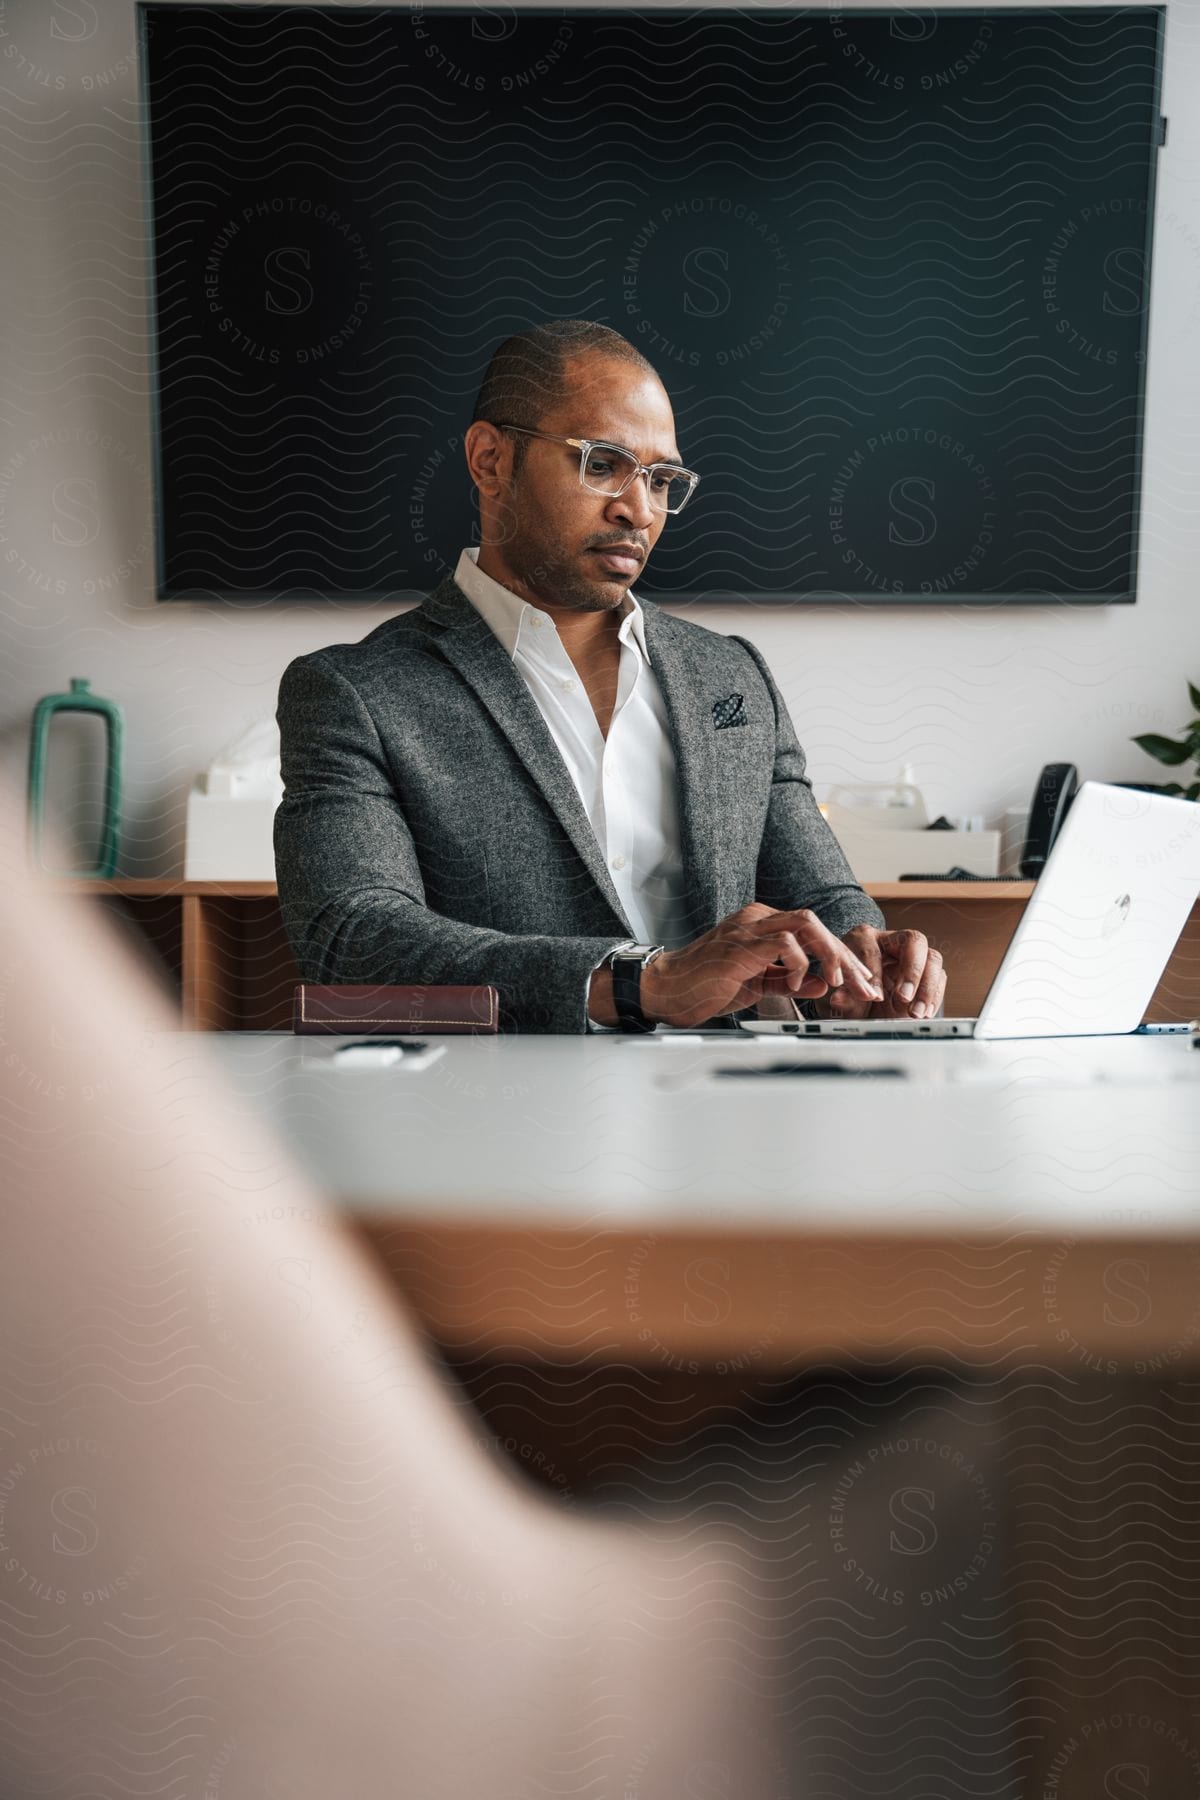 Stock photo of a man wearing a wool dress coat and glasses types on a laptop in an office meeting room